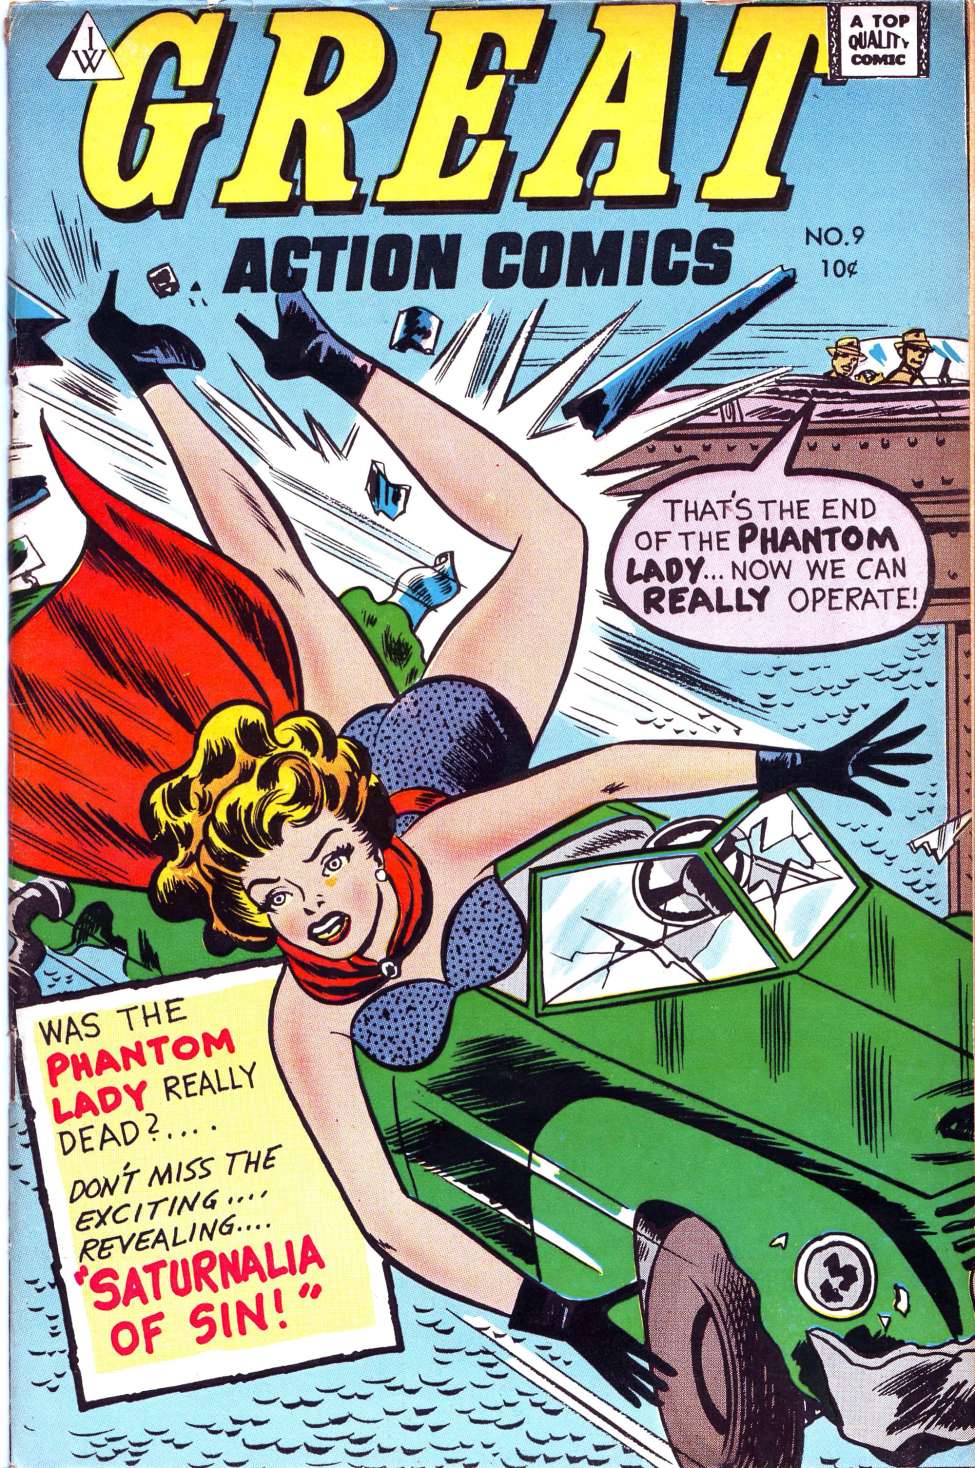 Book Cover For Great Action Comics 9